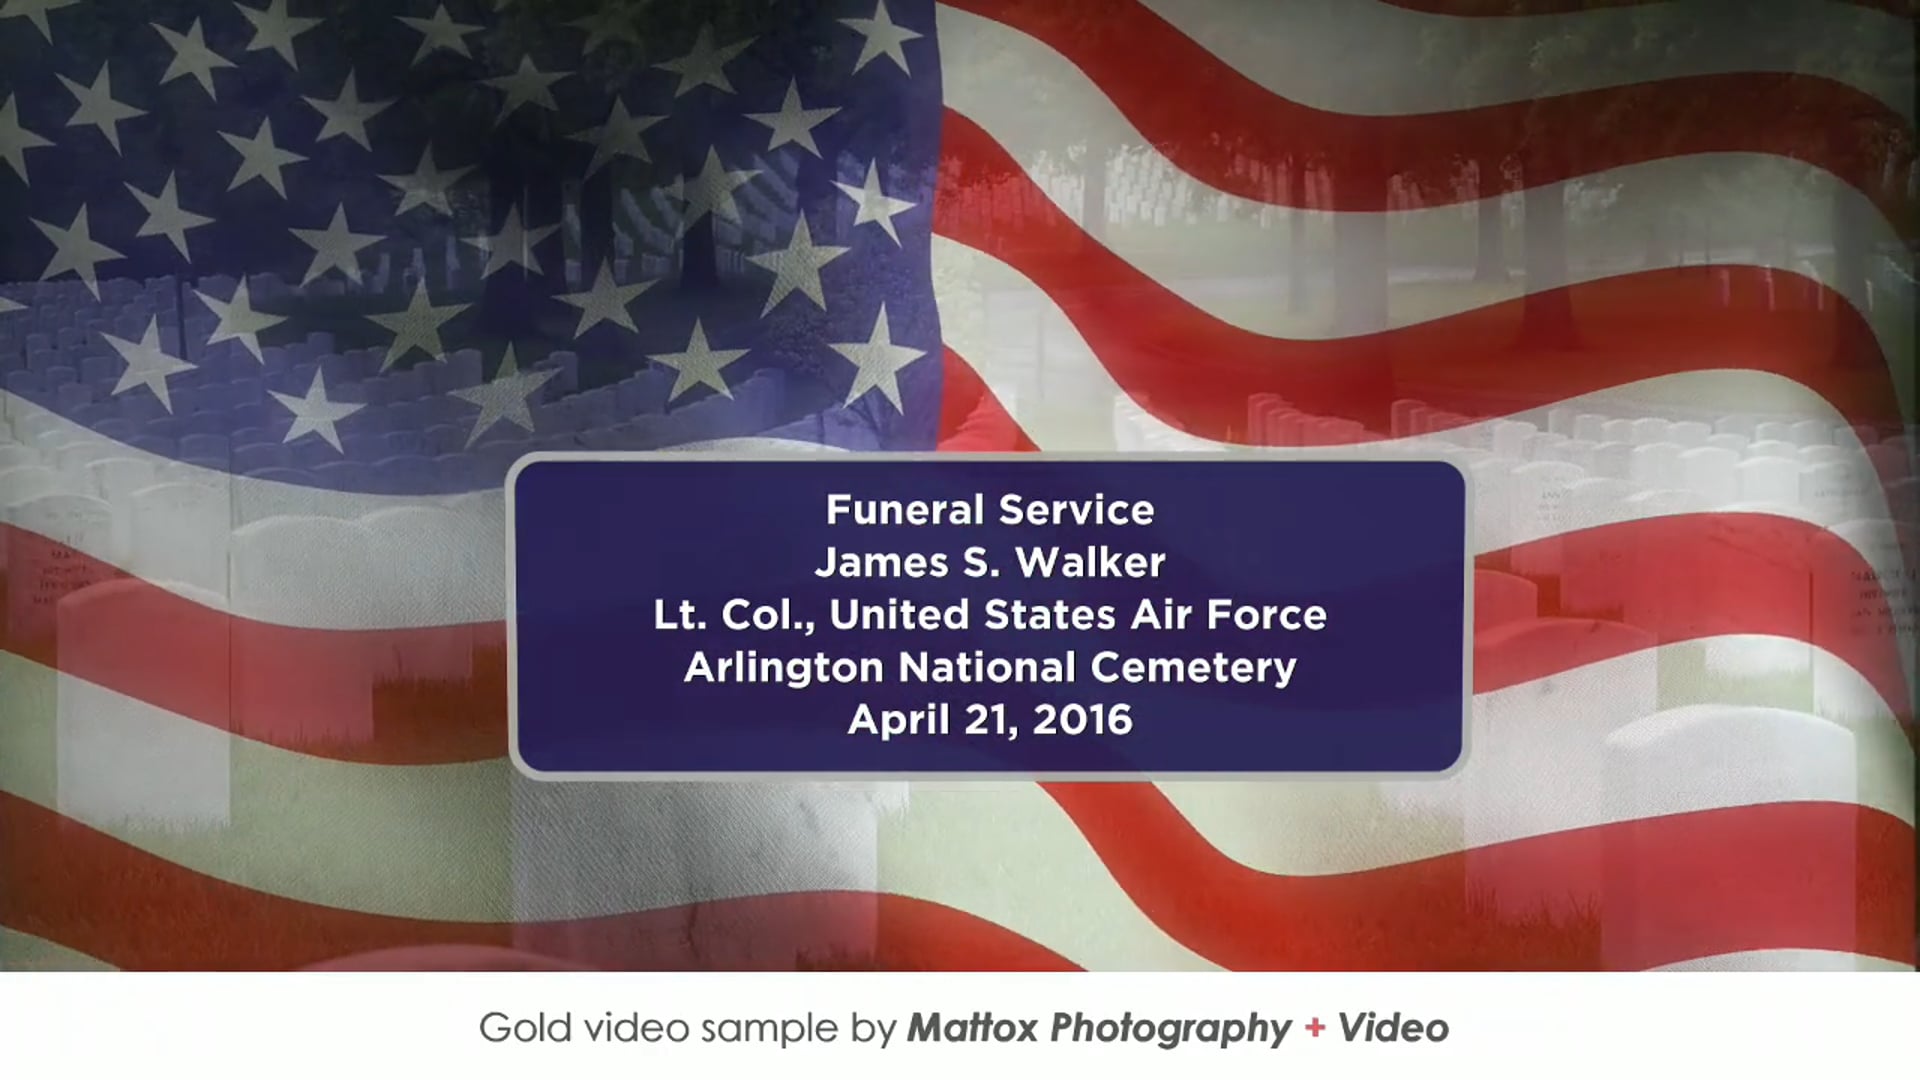 Gold Sample: Air Force Service